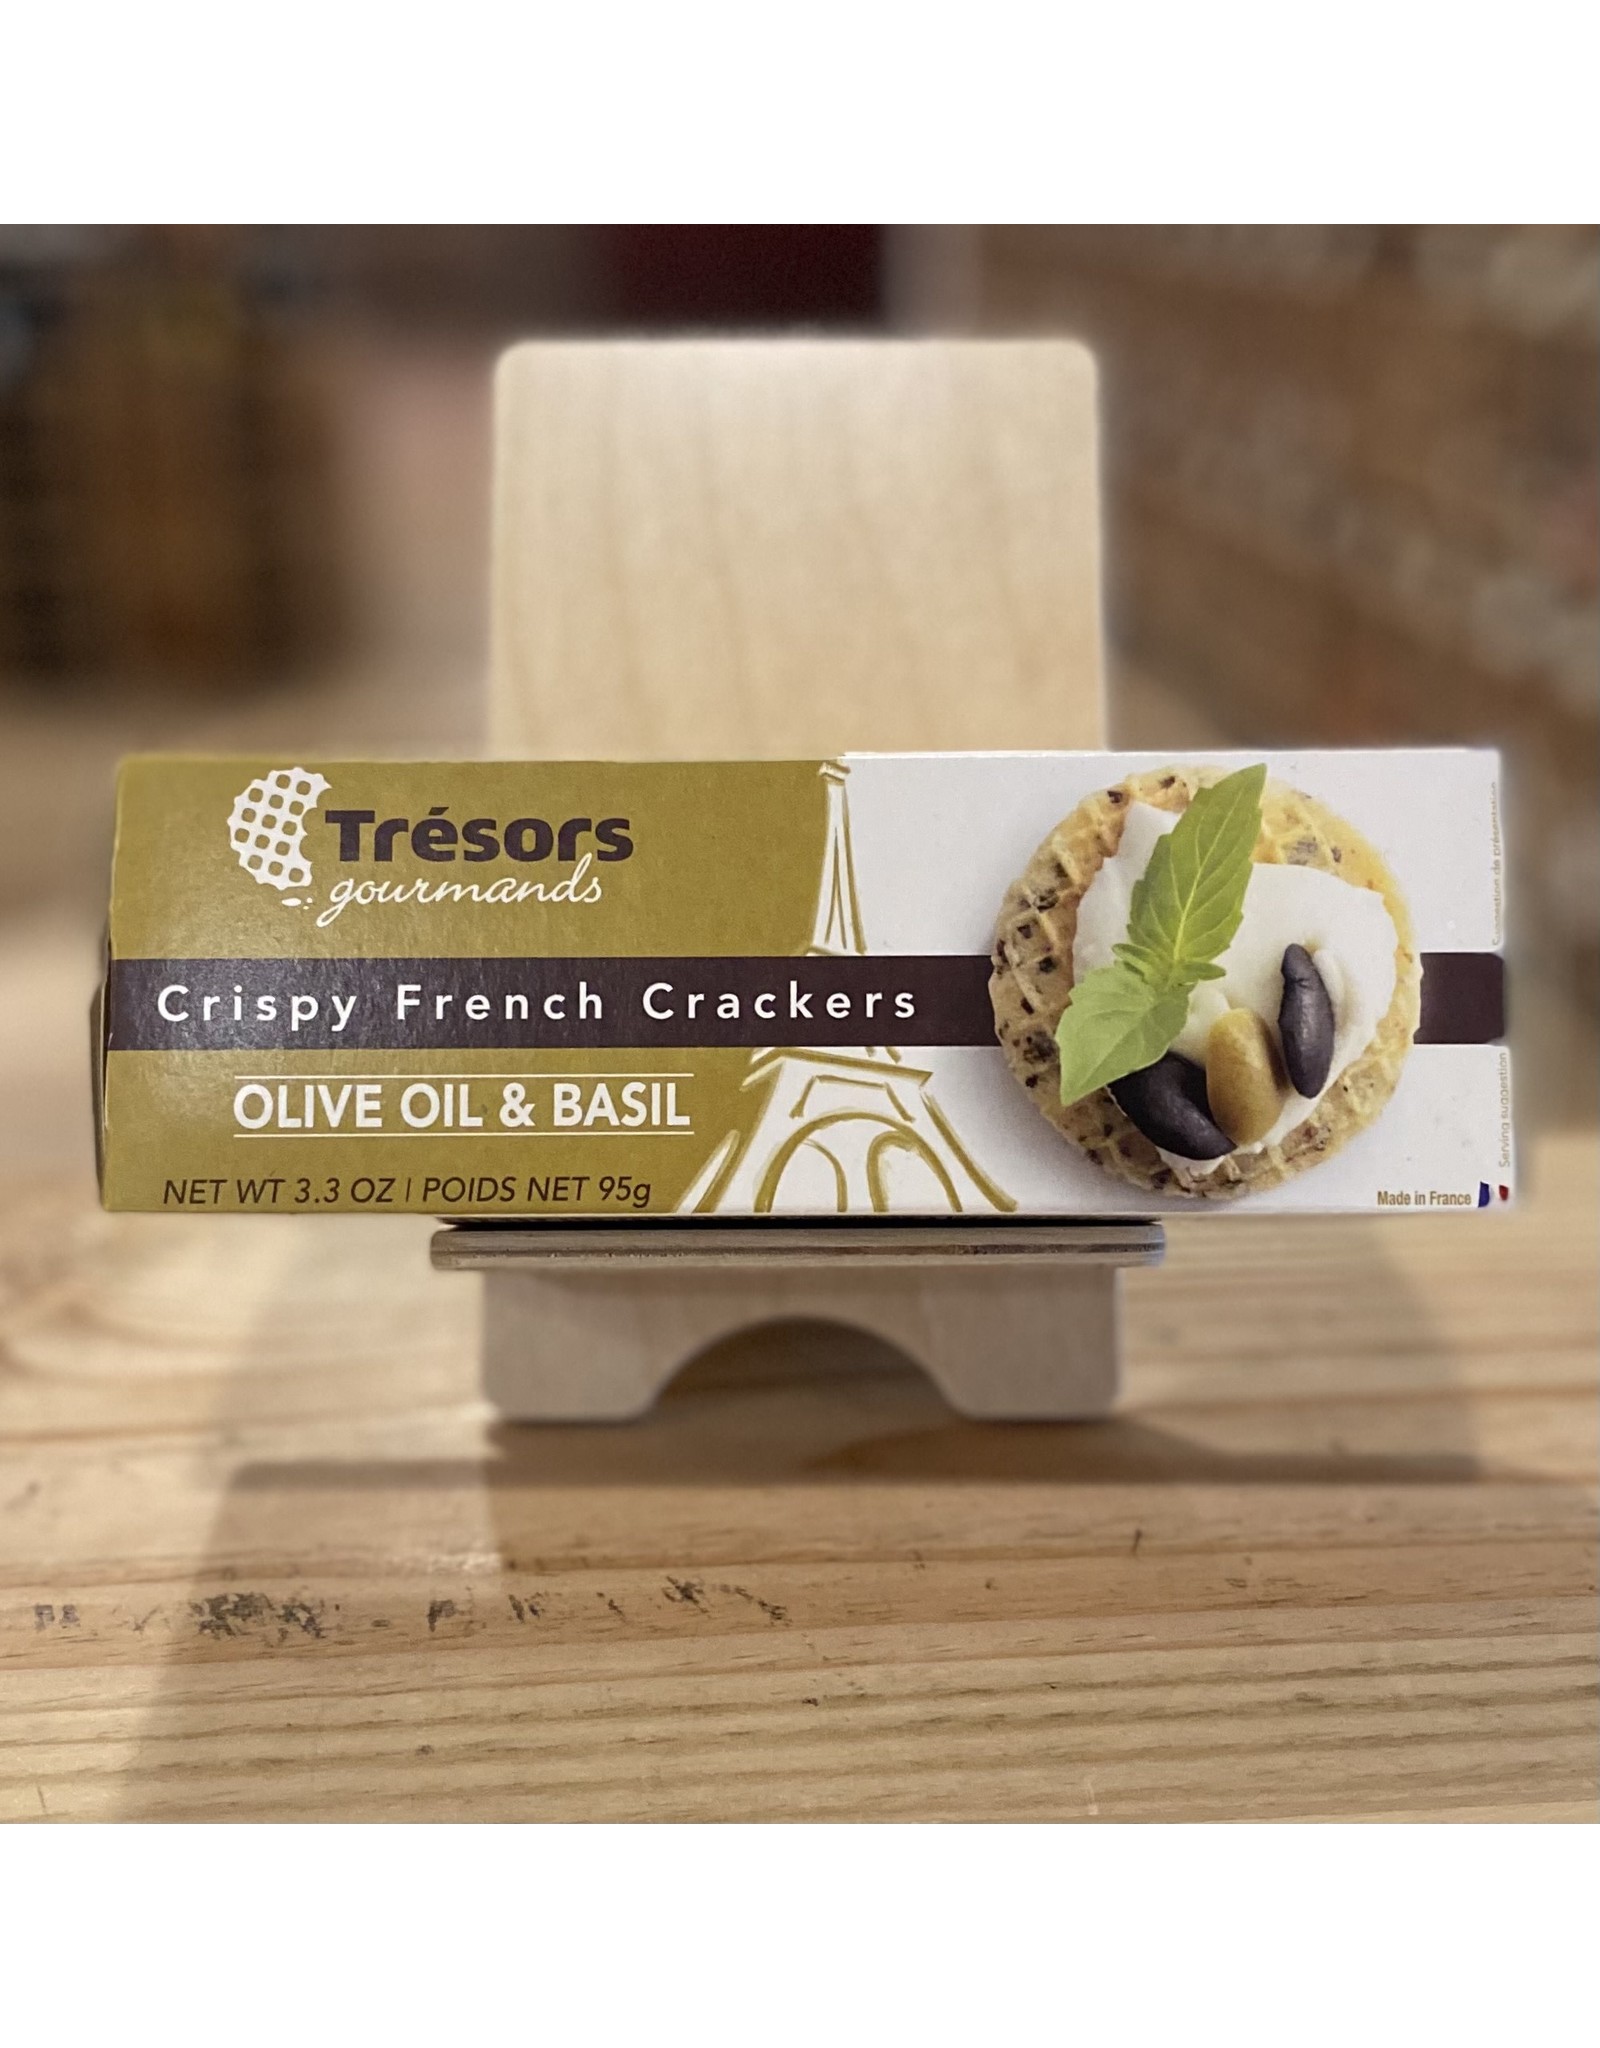 Cracker Tresors Gourmands Crispy French Crackers w/Olive Oil and Basil - France